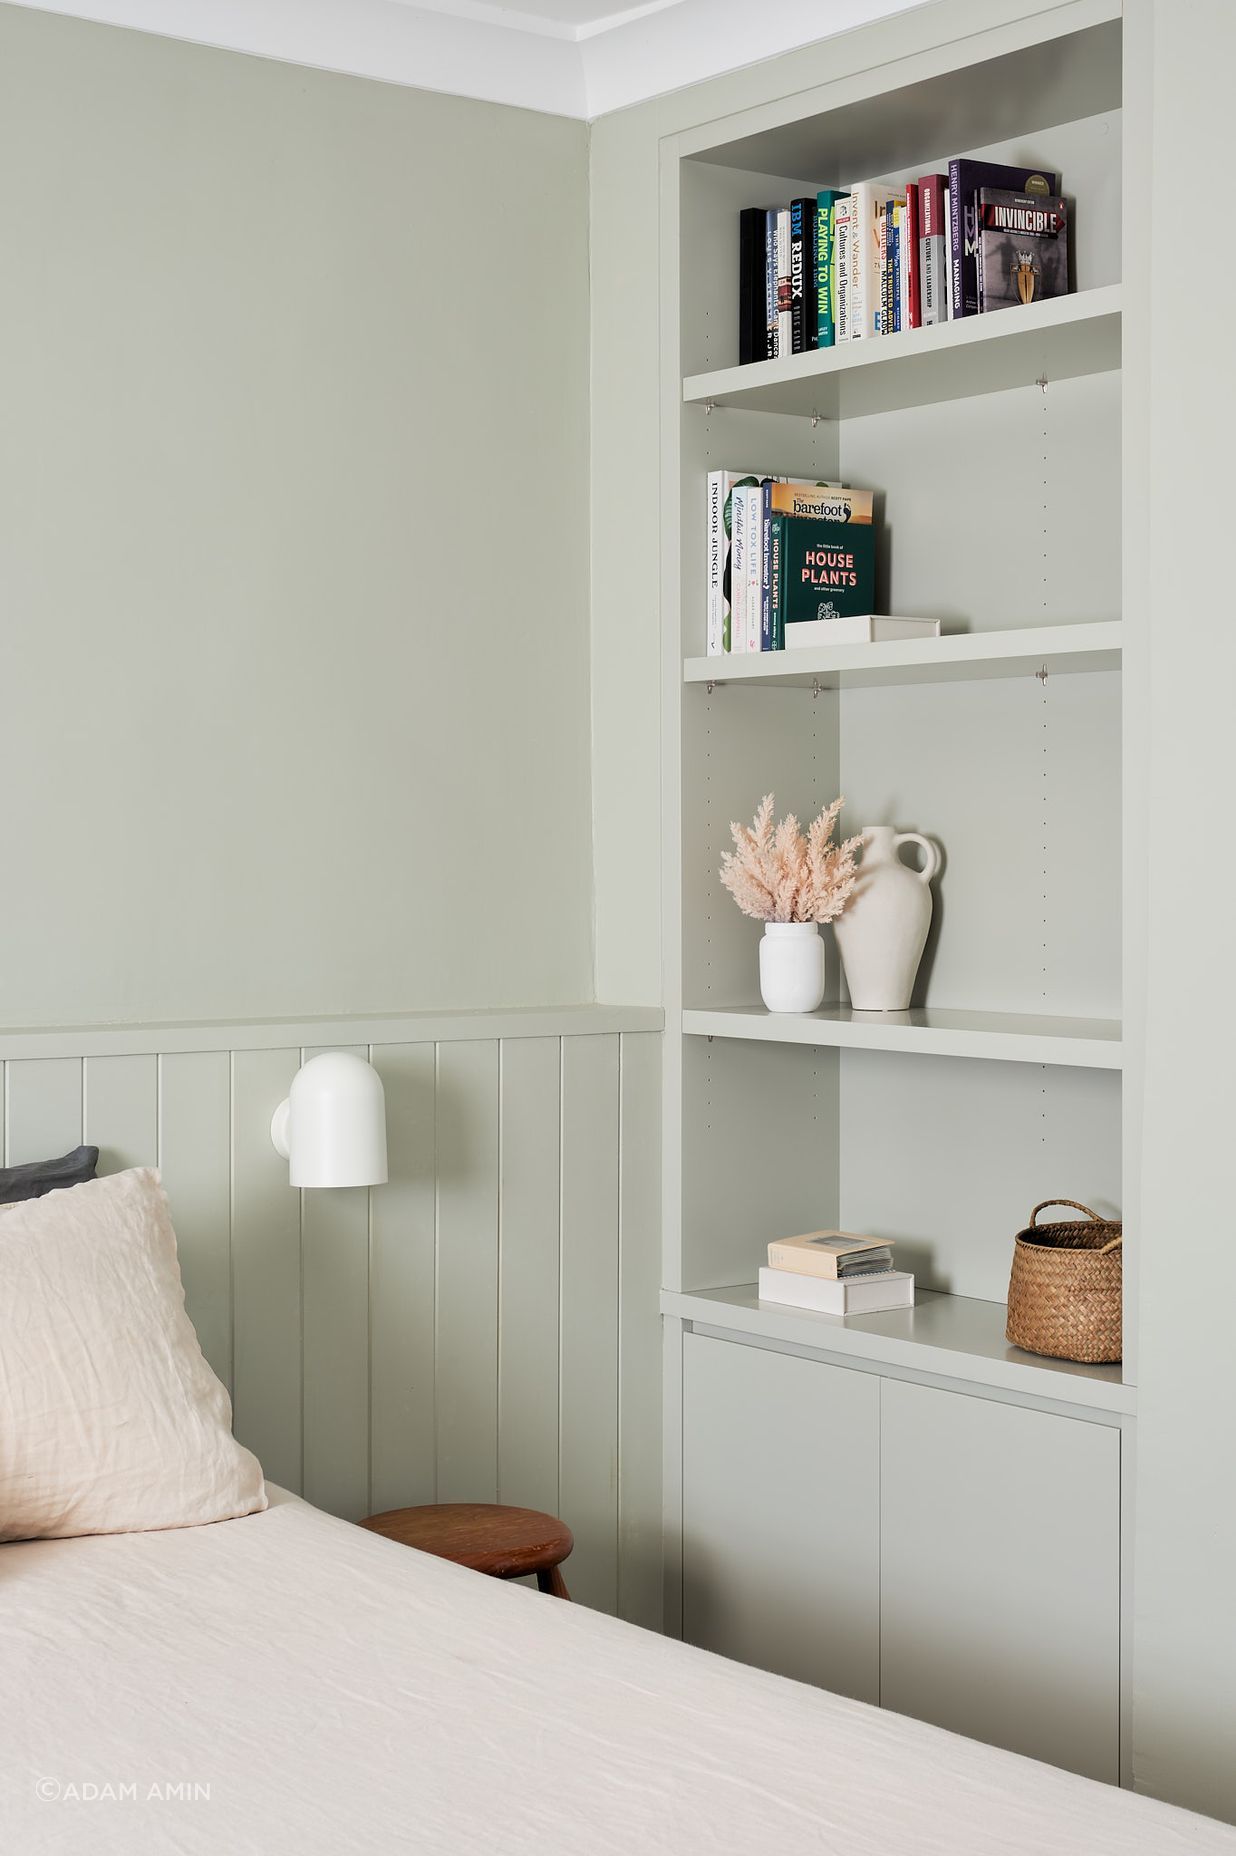 The use of custom joinery is further employed, creating an incidental shelf above the bed as a bedhead and open cabinetry for personalised items.